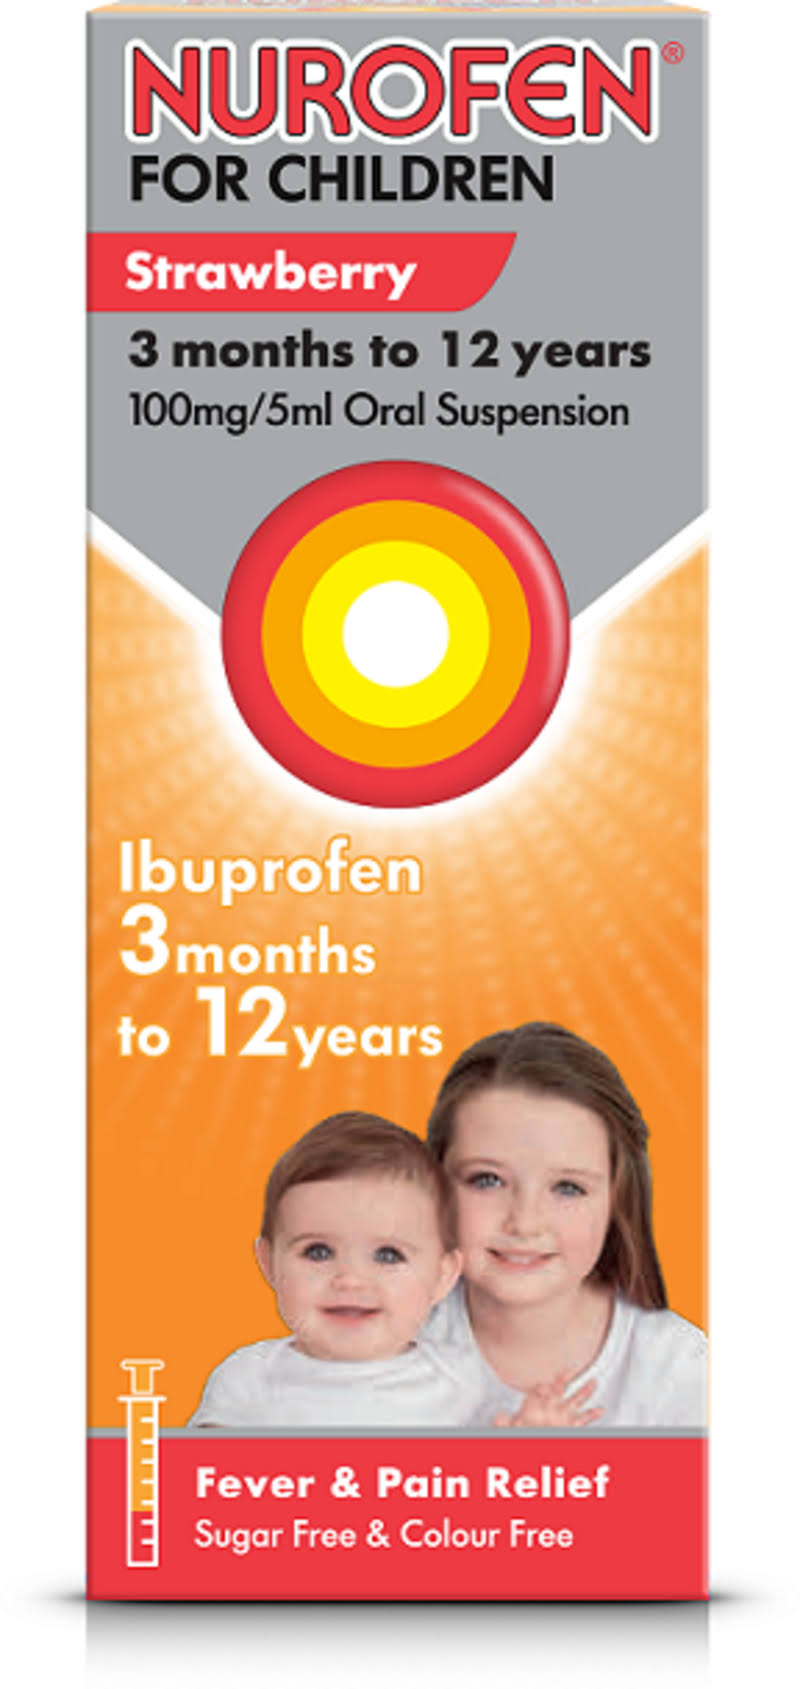 Nurofen for Children Fever and Pain Relief - Strawberry, for 3 Months to 12 Years, 200ml